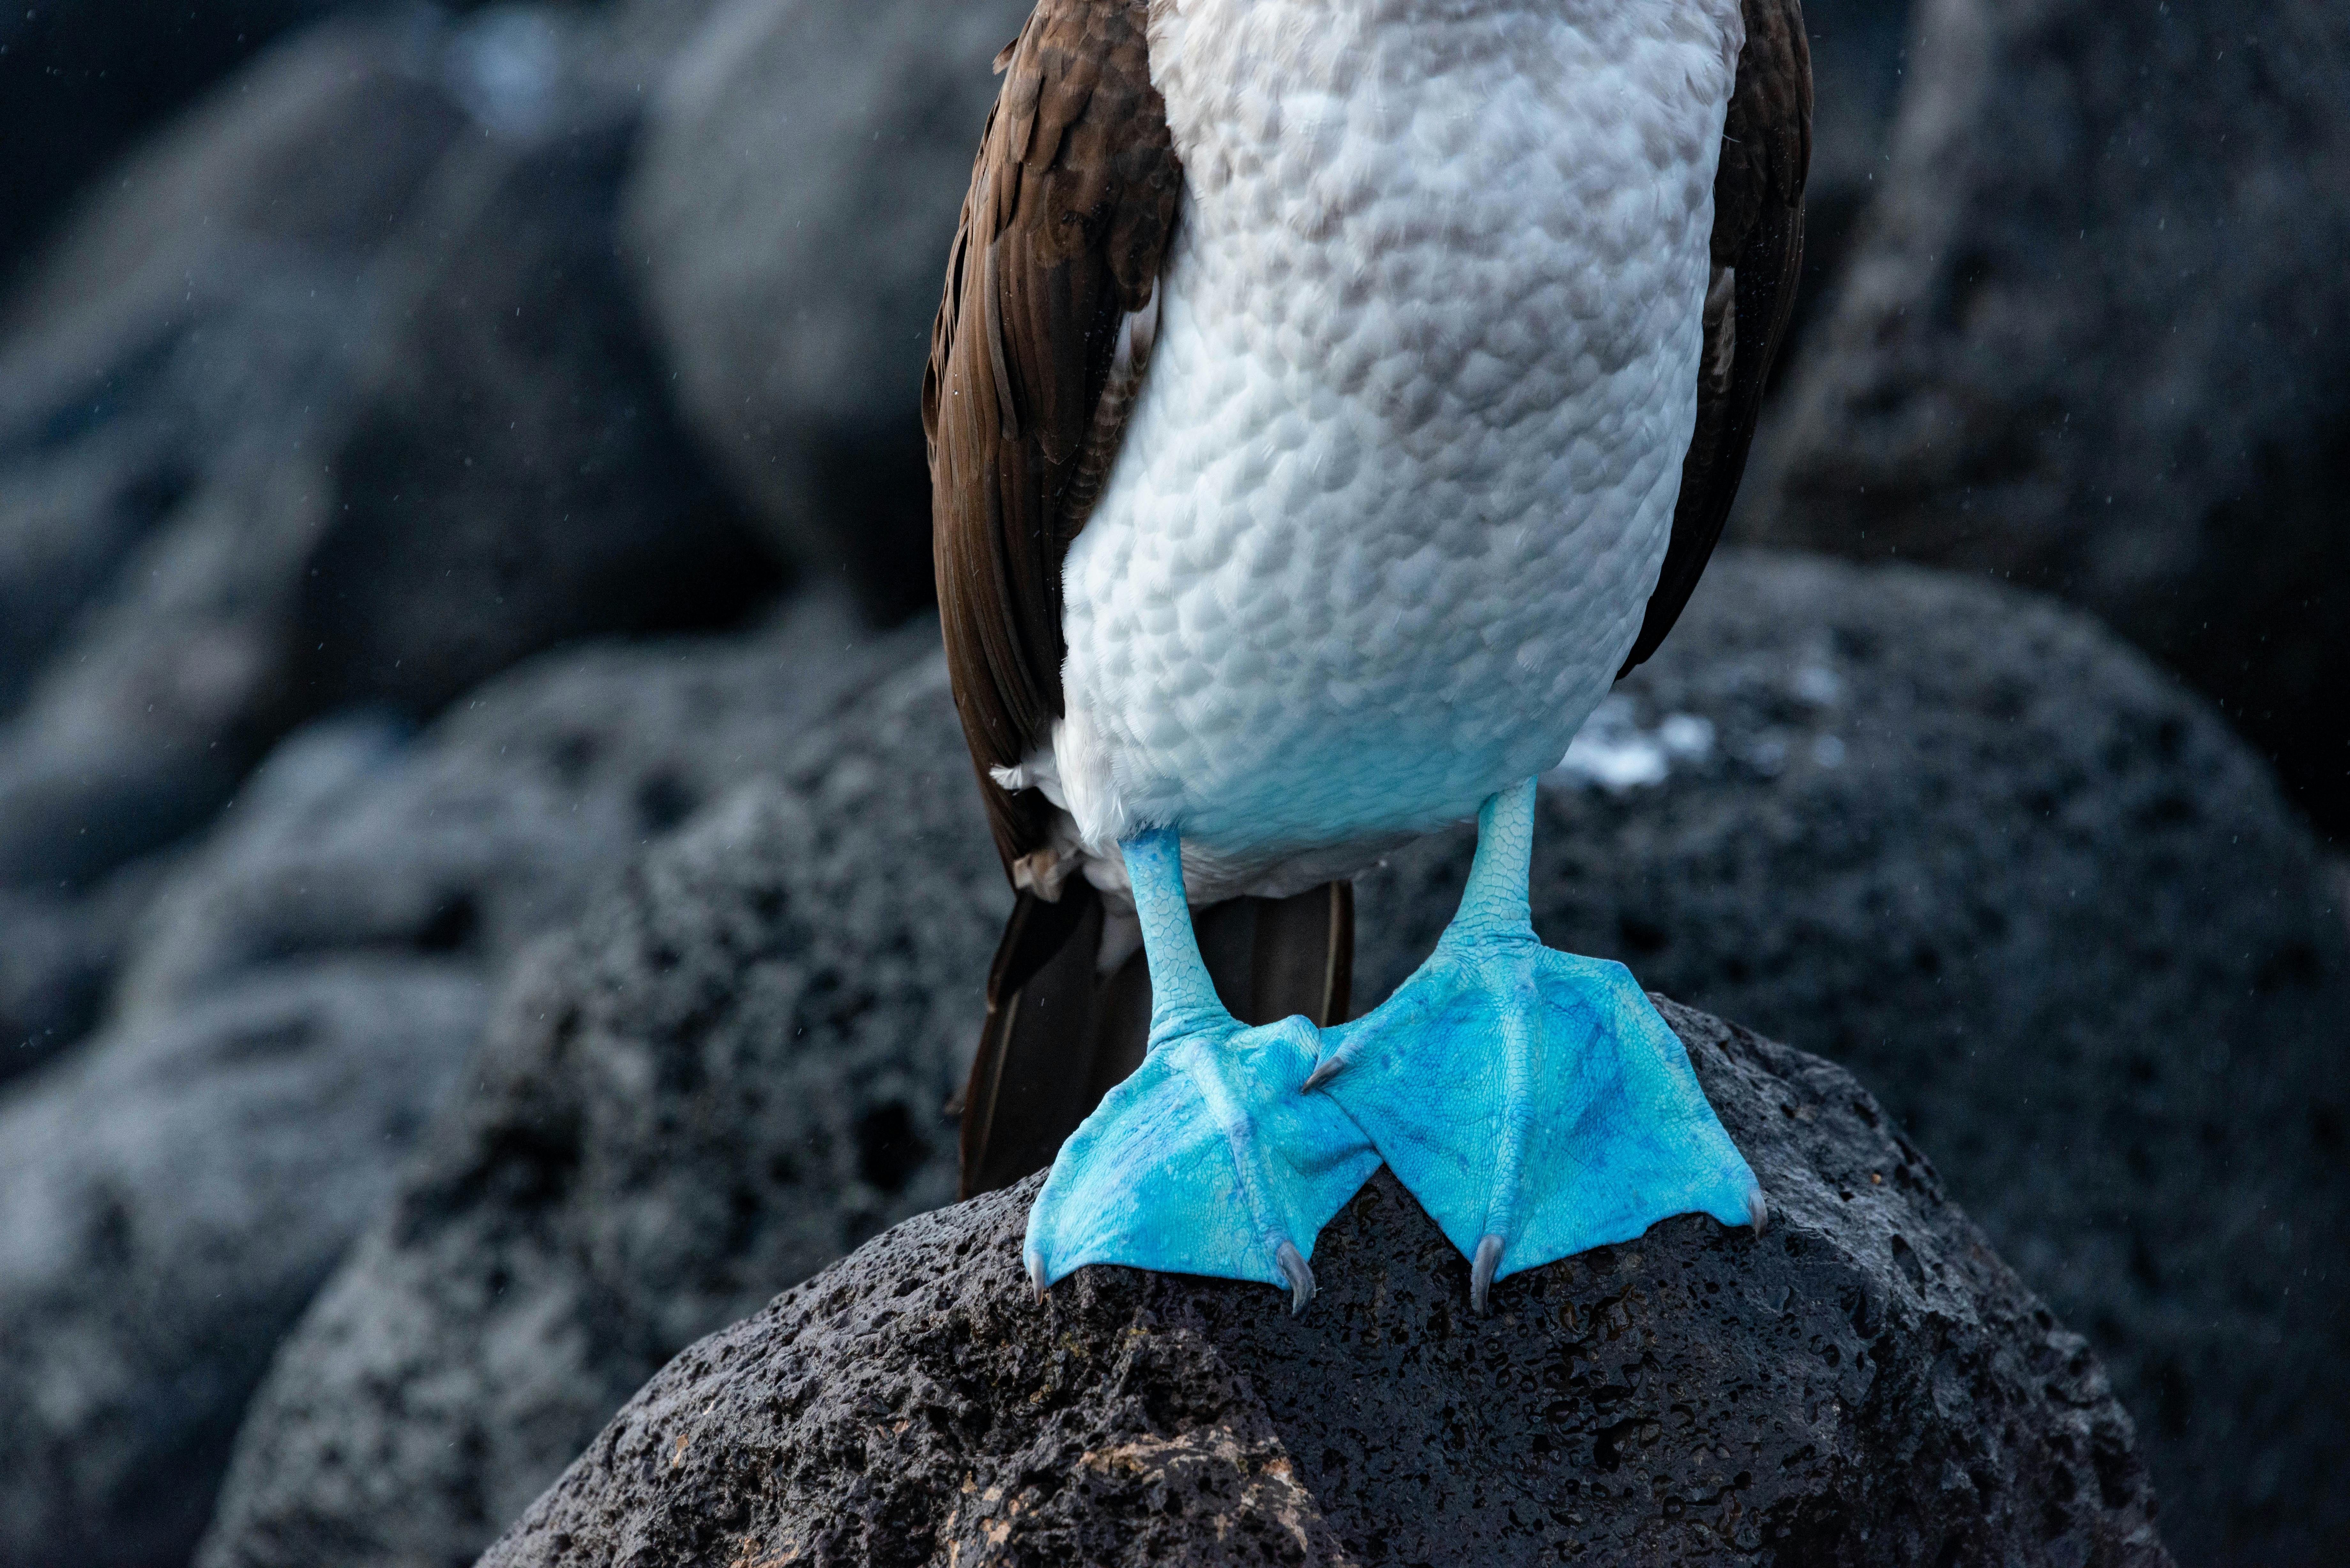 Blue-Footed Booby  National Geographic